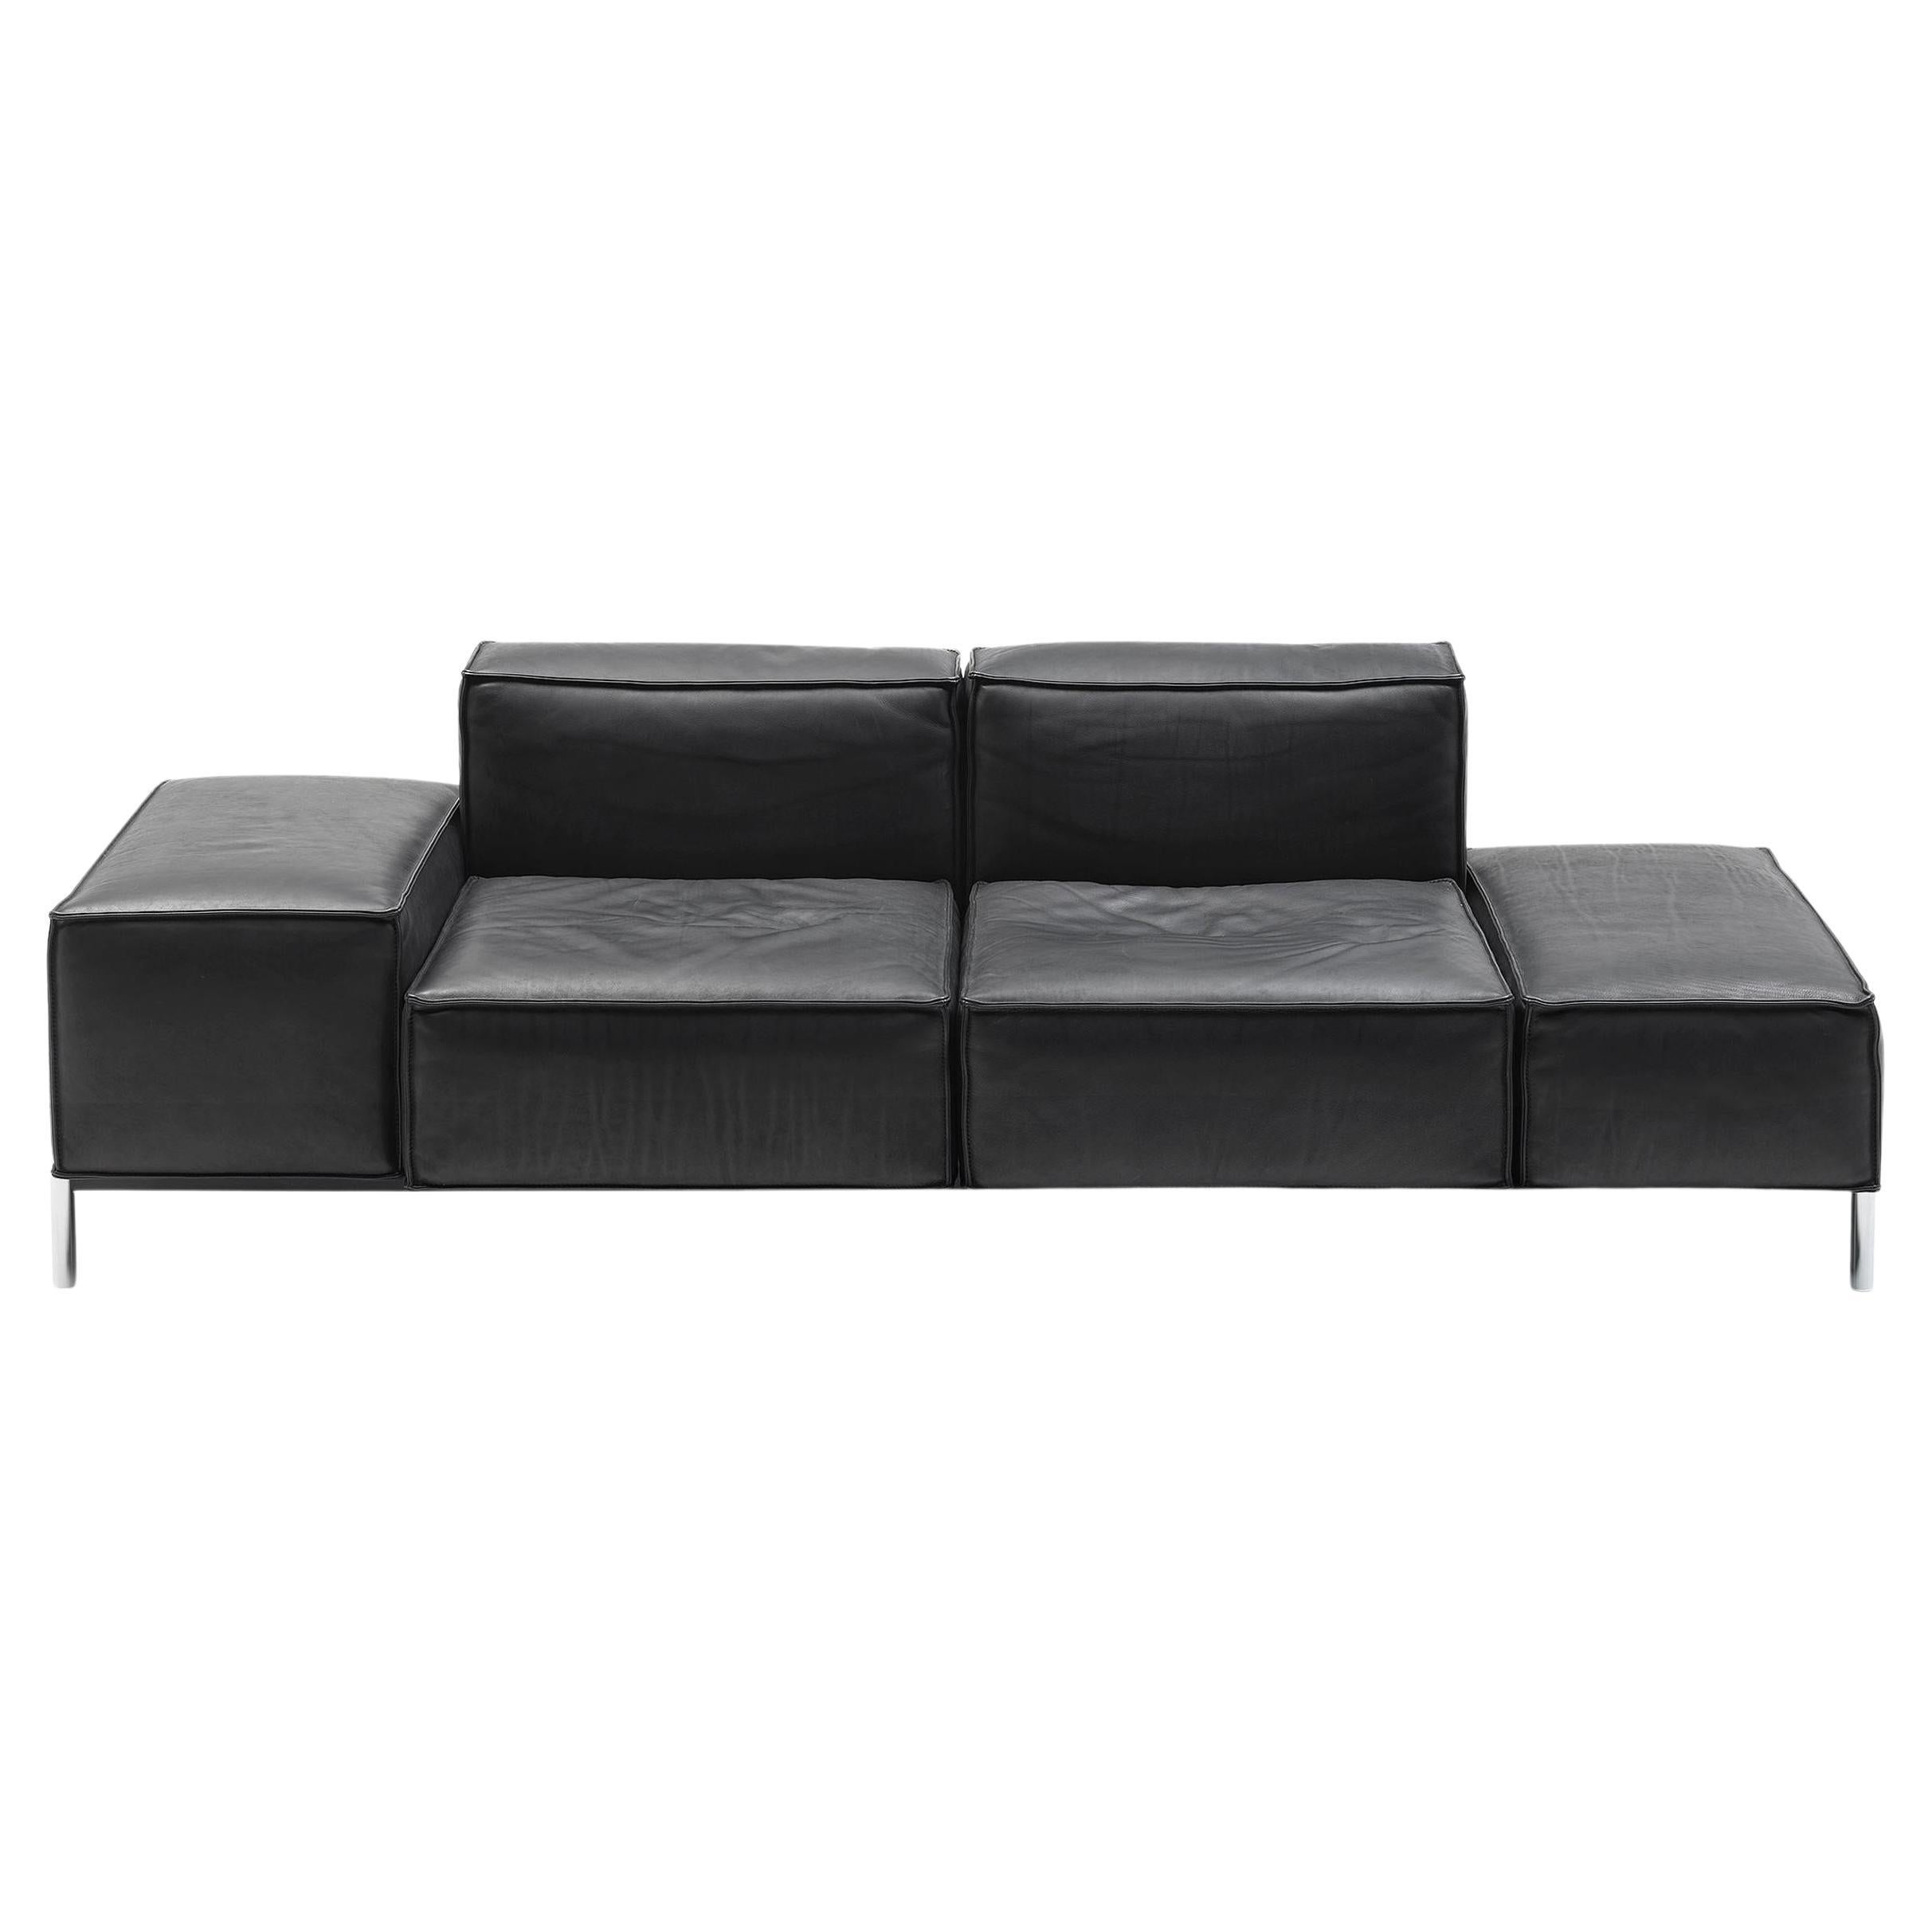 De Sede DS-21/123A Two-Seat Modular Sofa in Black Leather by Stephan Hürlemann